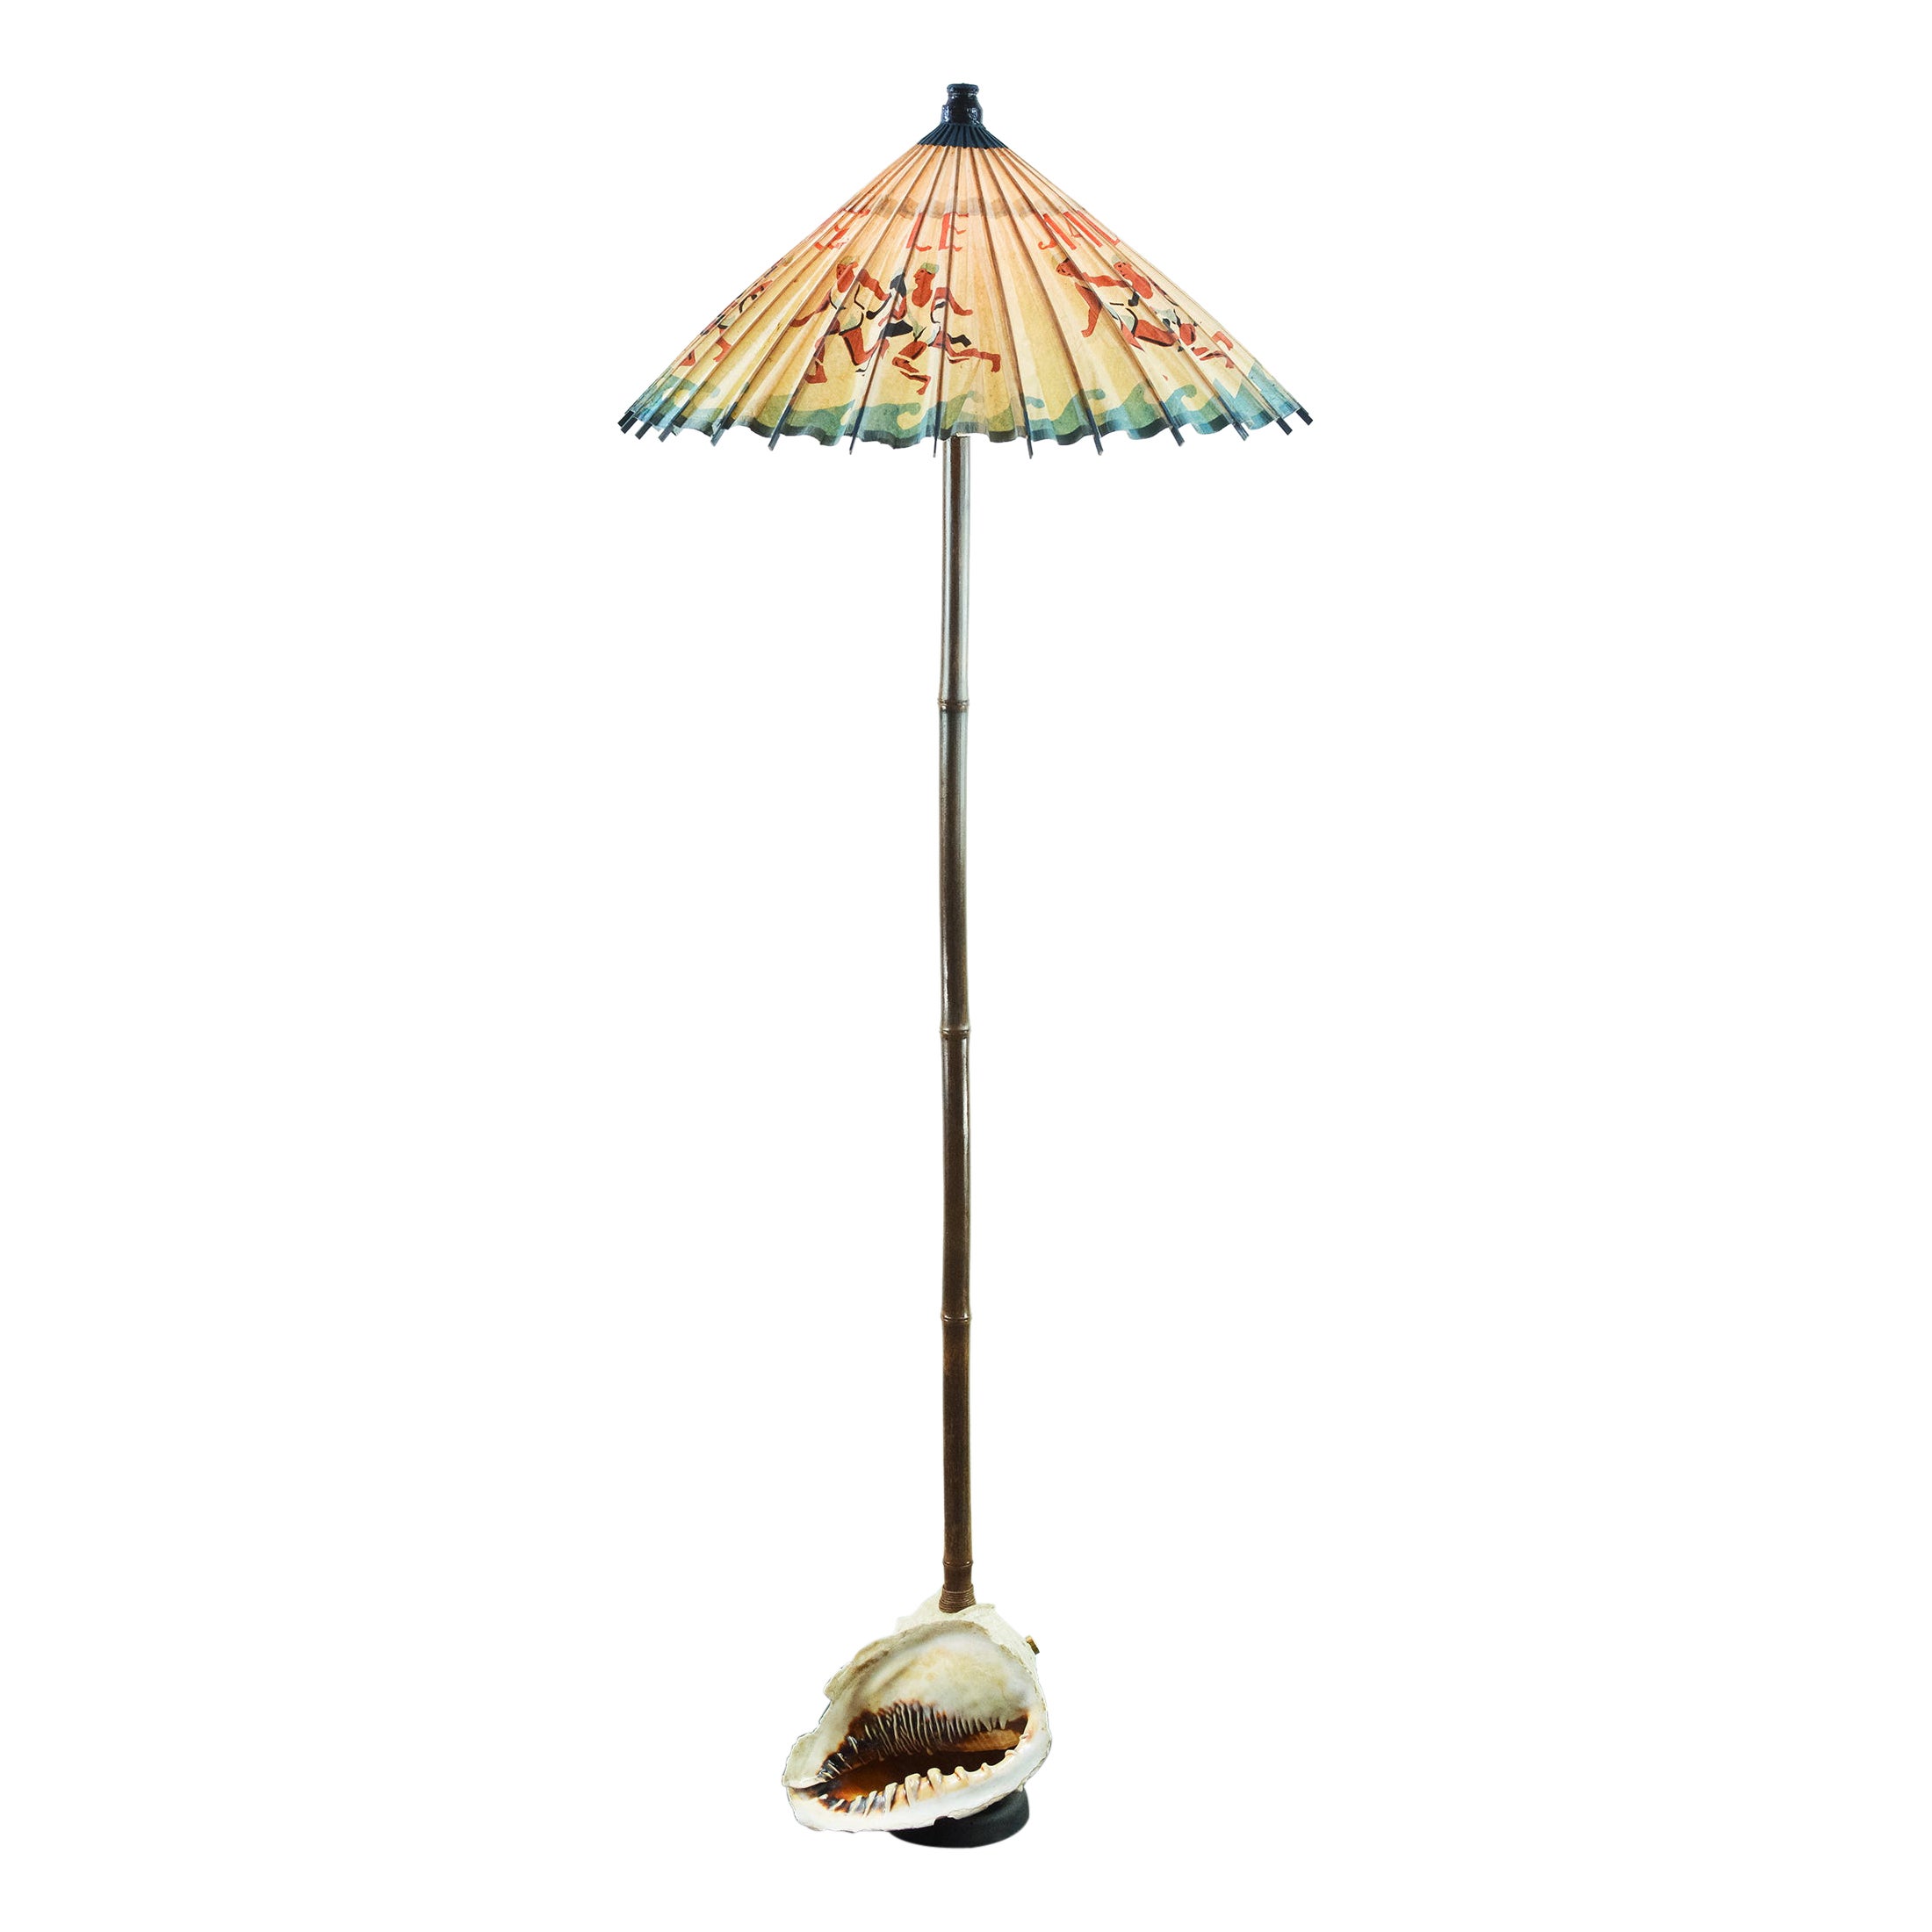 'Queen Helmet Conch Shell' Bamboo Floor Lamp with Vintage French Parasol Shade